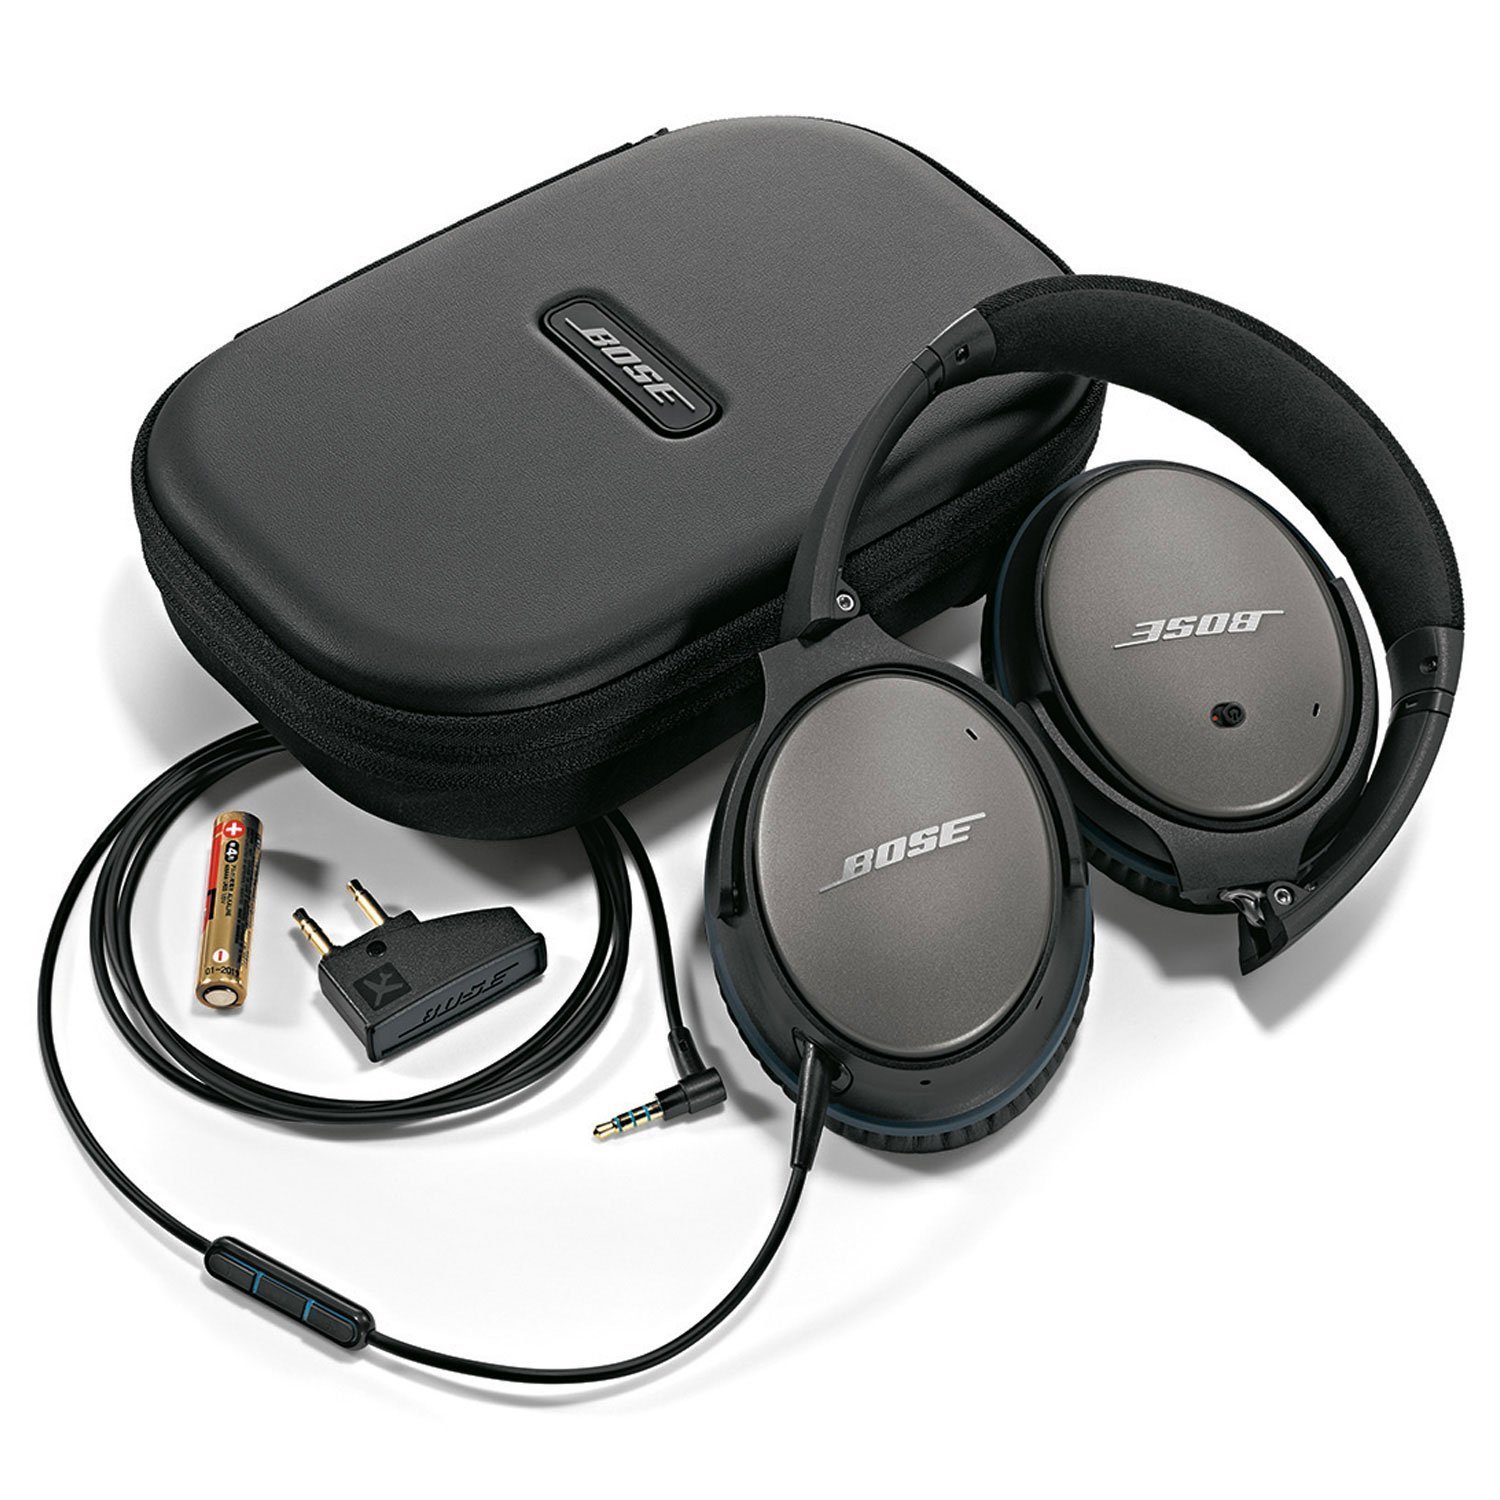 Bose QuietComfort 25 Acoustic Noise Cancelling Headphones for Apple devices - Black (Wired 3.5mm)